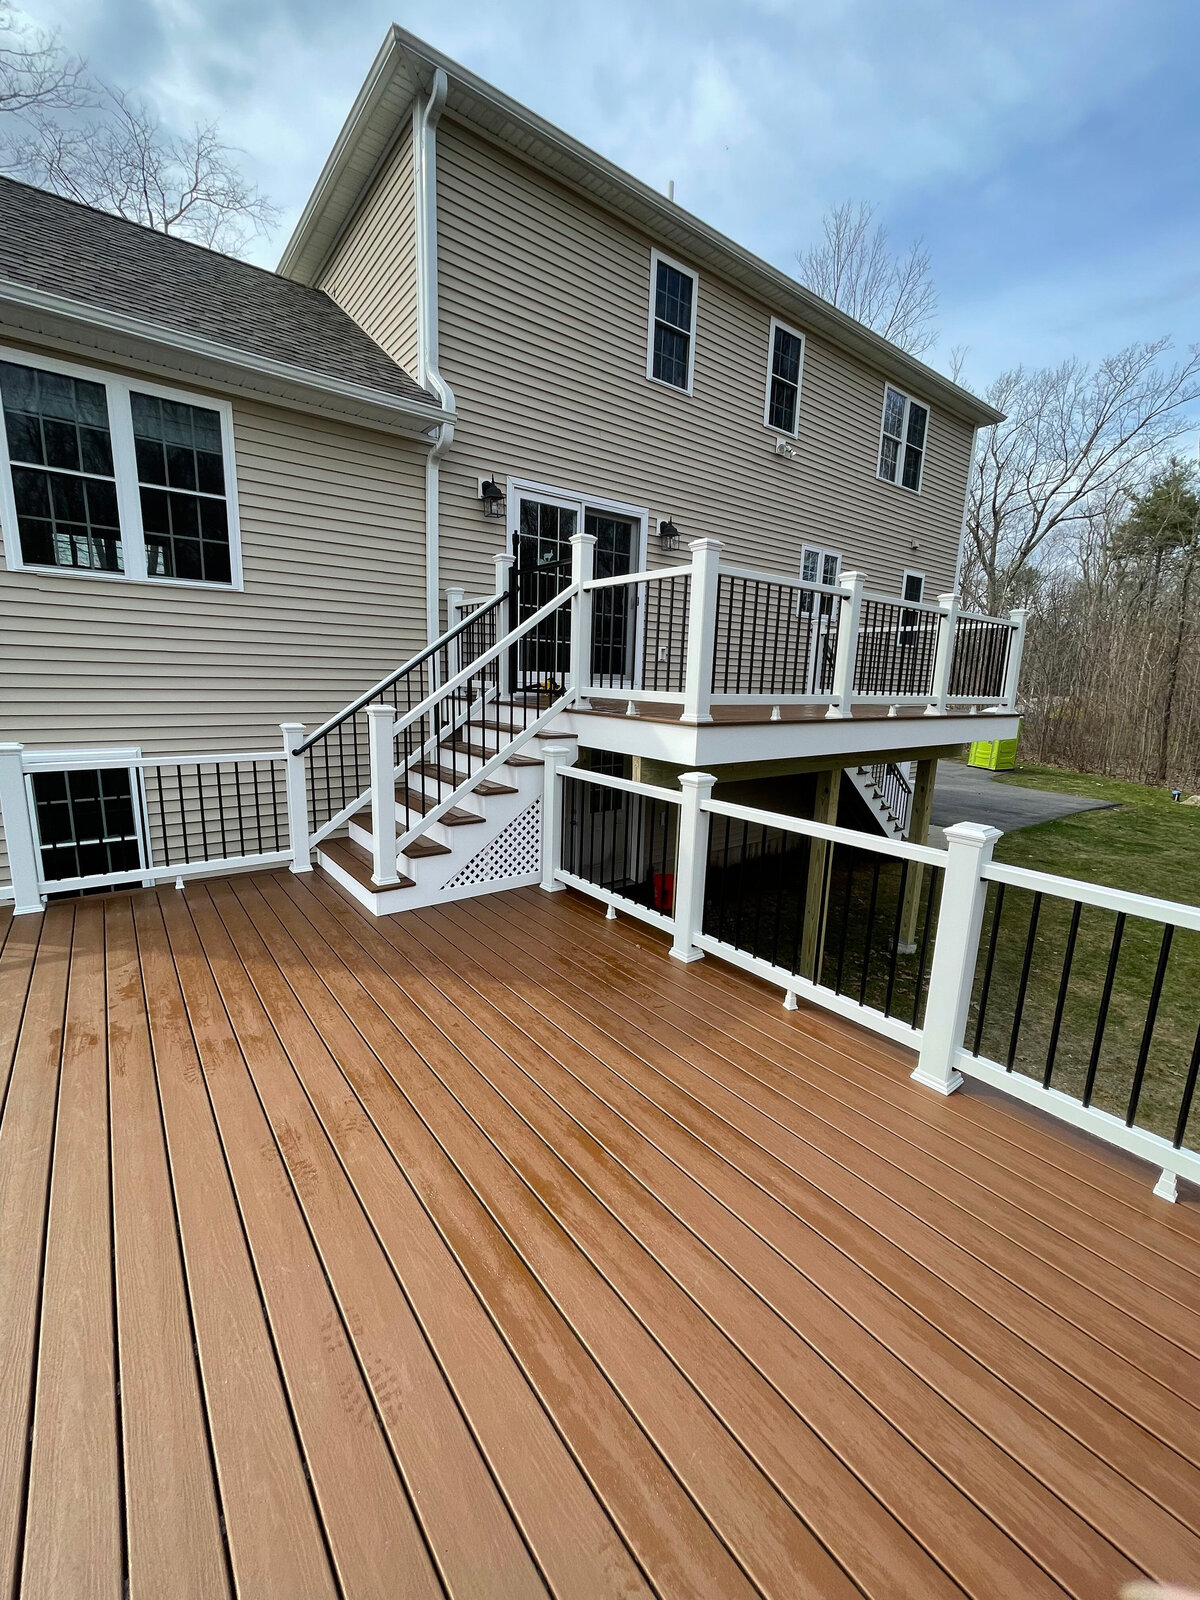 A multi tier pool deck with brown composite and white PVC railings built by a West Boylston Deck Contractor